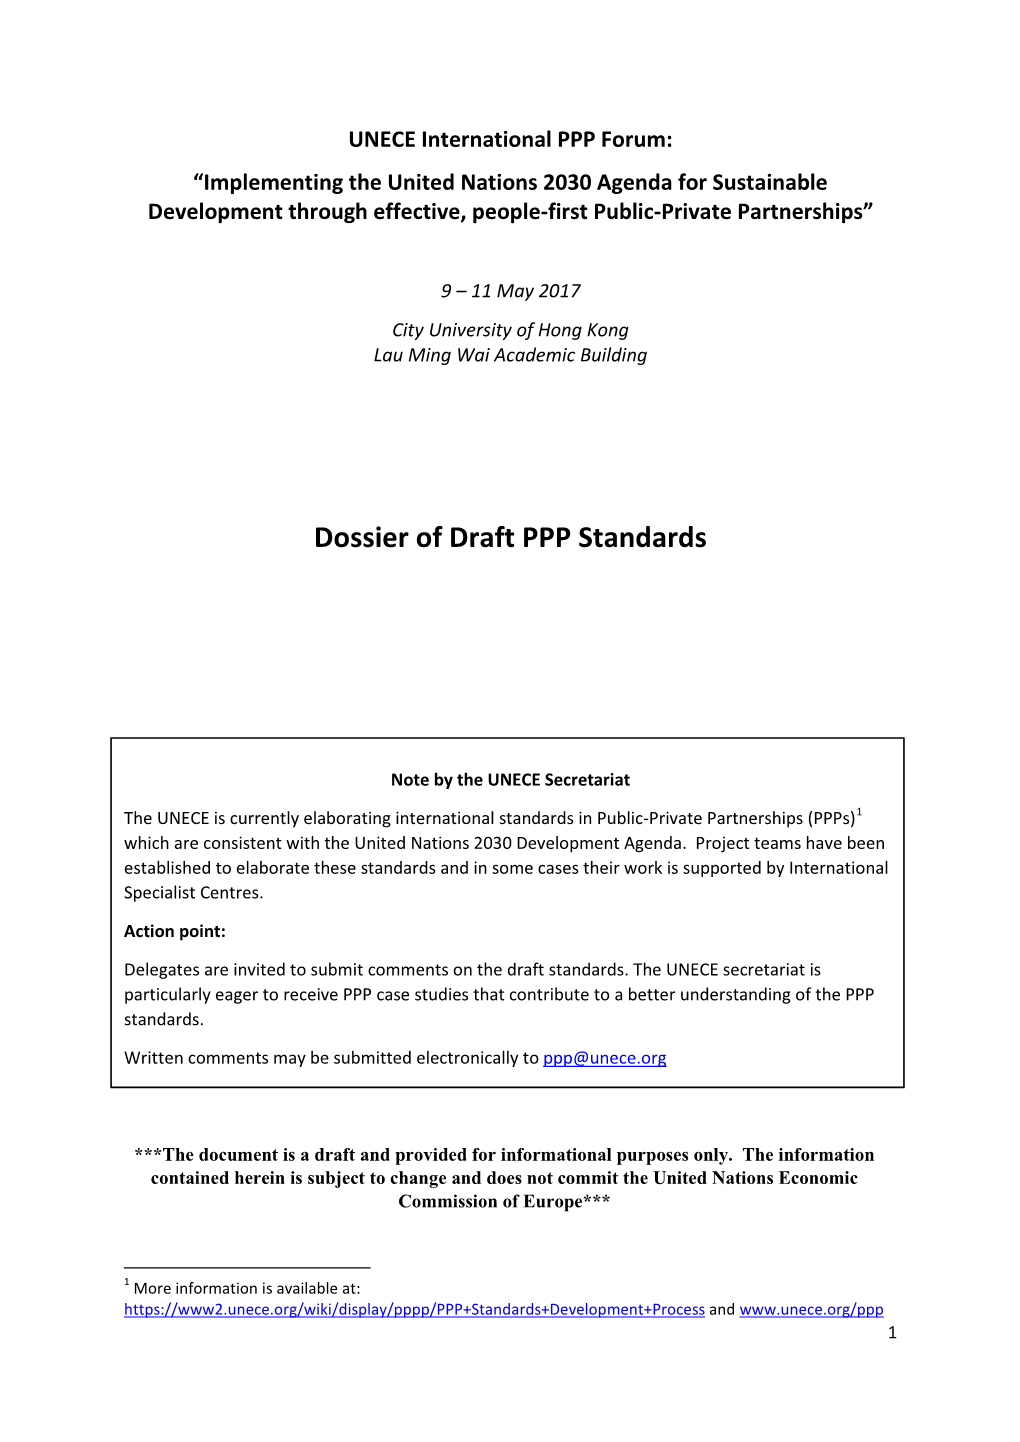 Dossier of Draft PPP Standards